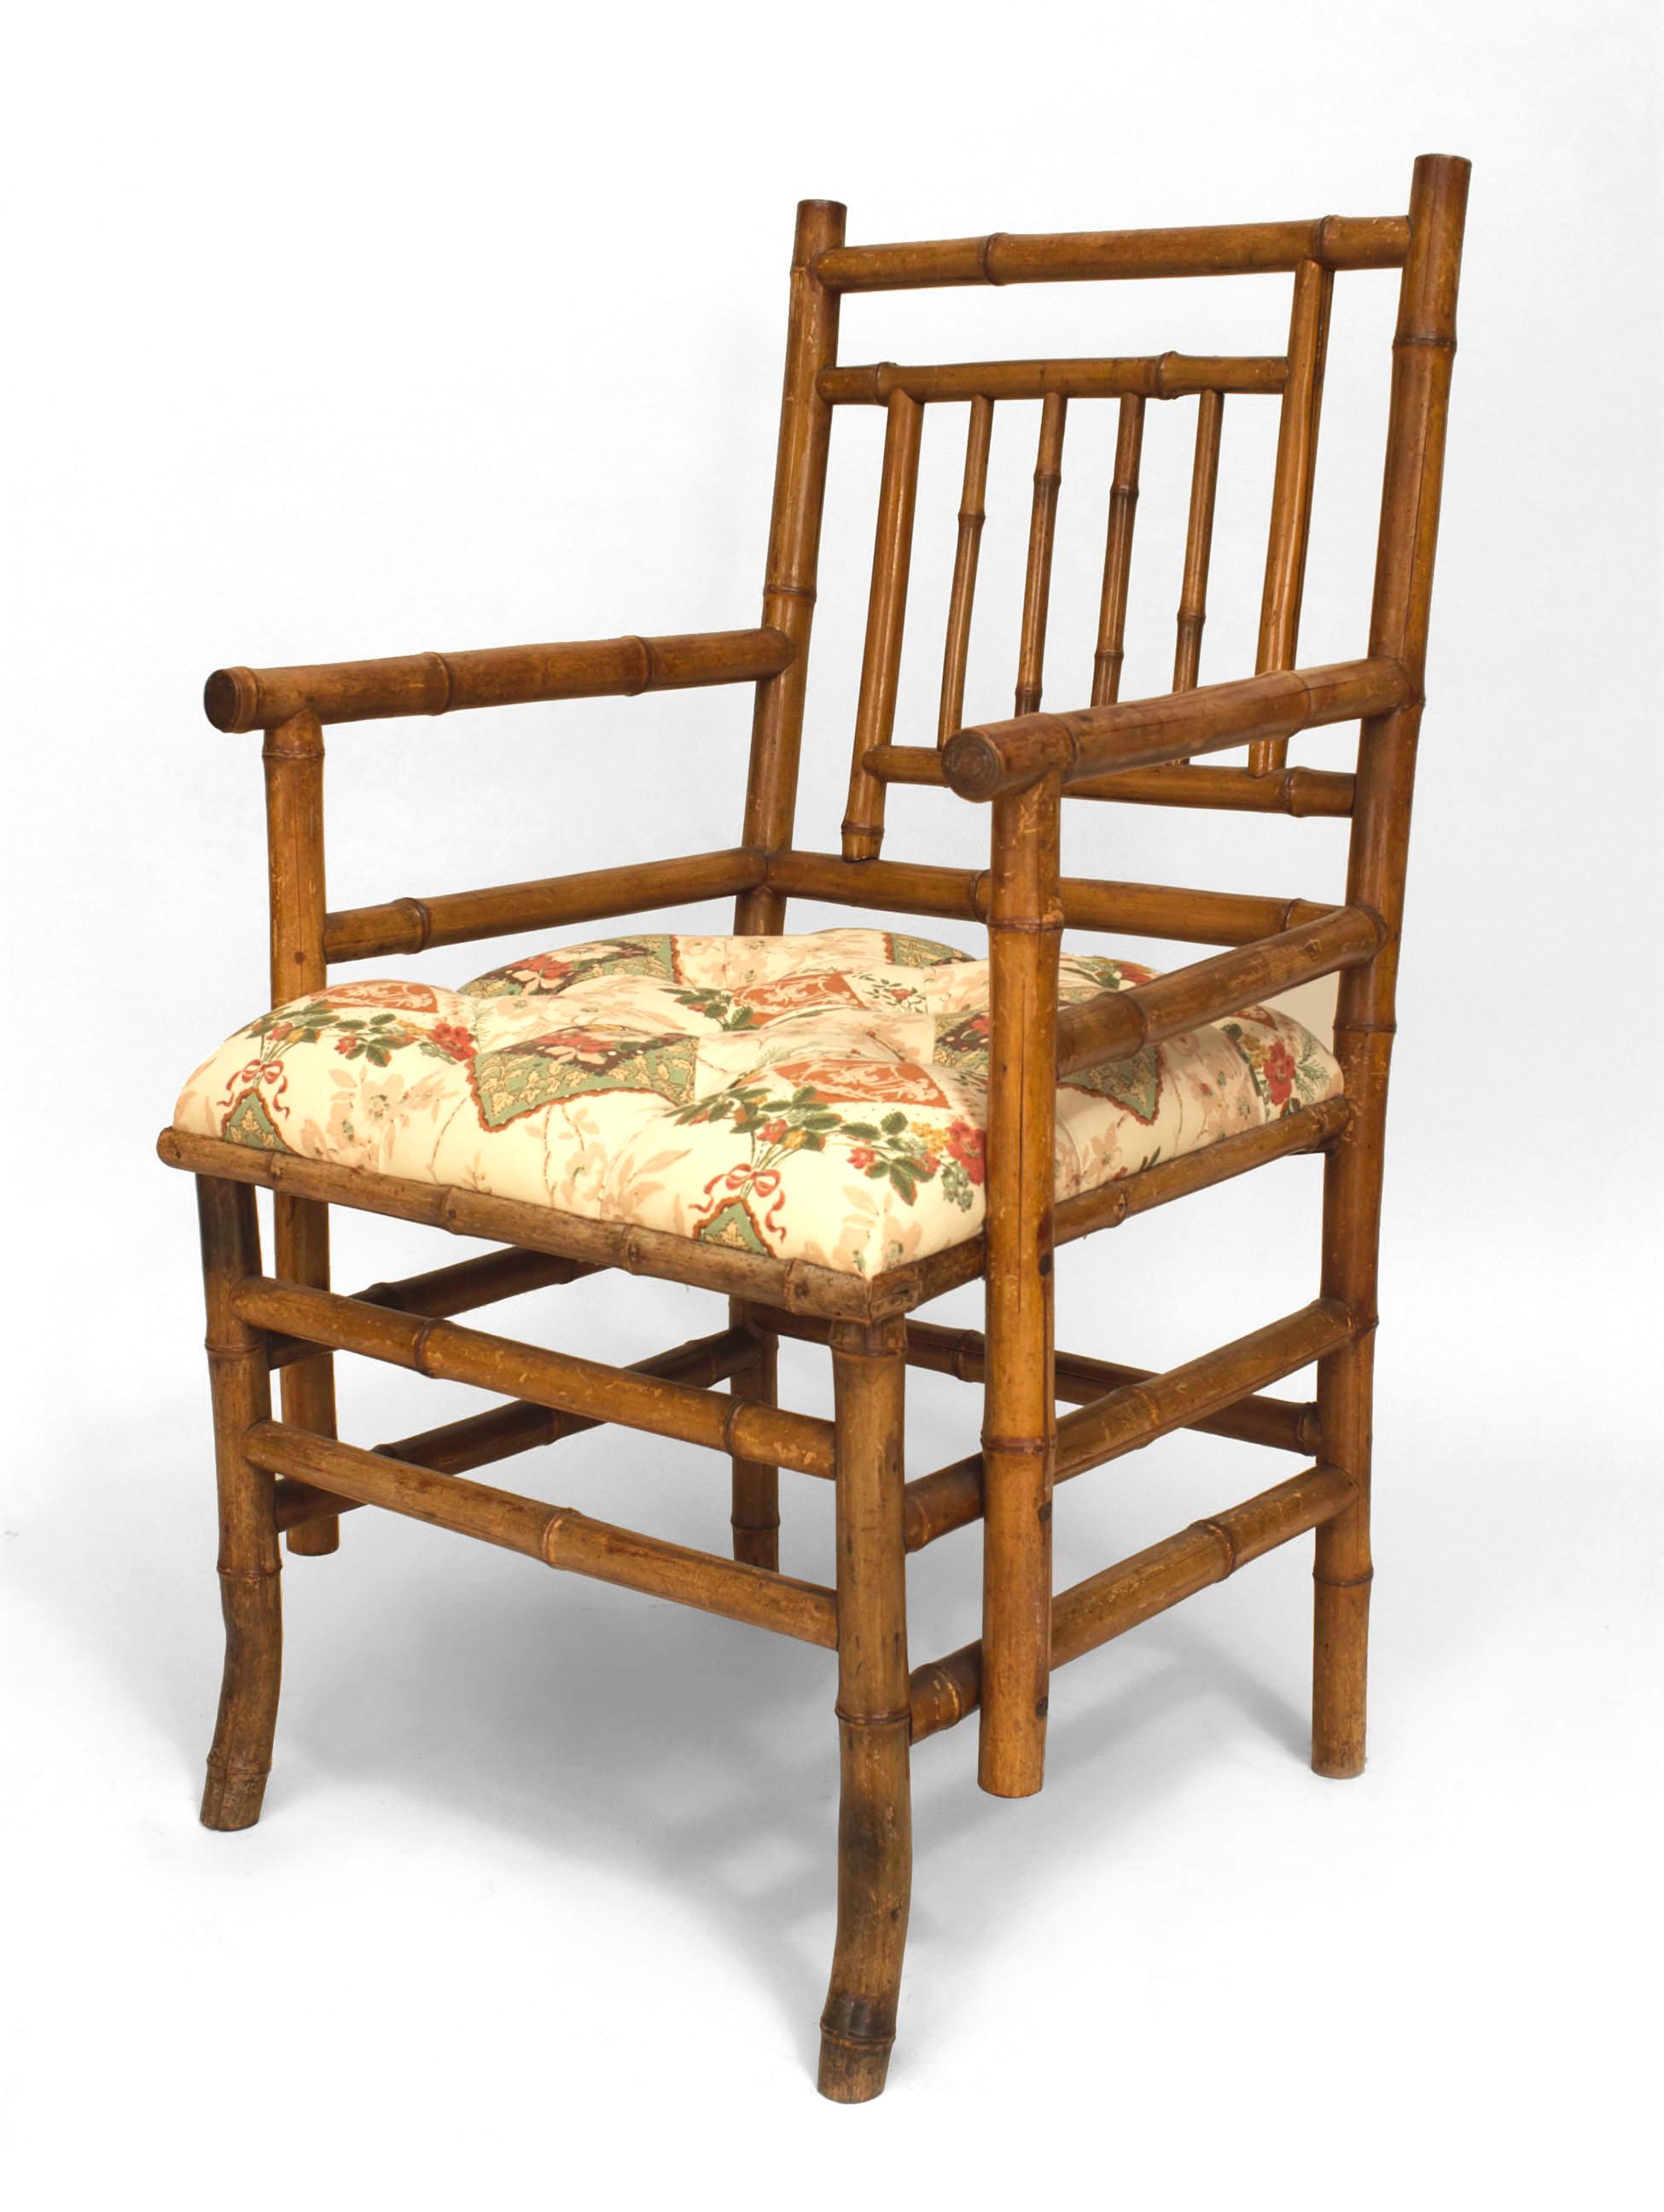 Bamboo (19th Cent-possibly French) arm chair with a floral upholstered seat and open spindle design back supported with a box form stretcher
